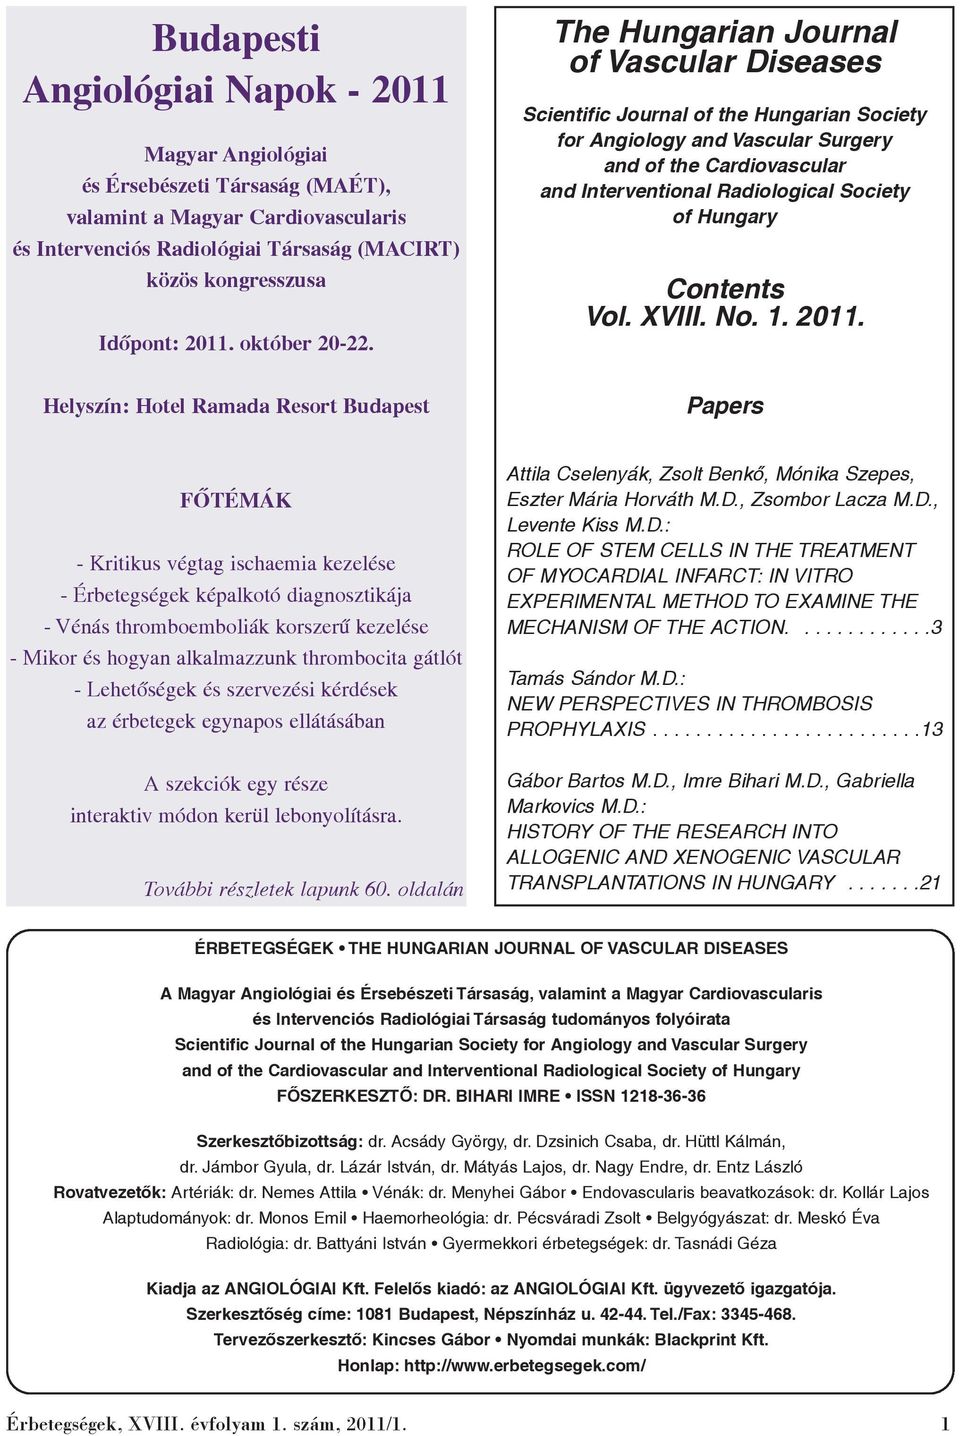 The Hungarian Journal of Vascular Diseases Scientific Journal of the Hungarian Society for Angiology and Vascular Surgery and of the Cardiovascular and Interventional Radiological Society of Hungary